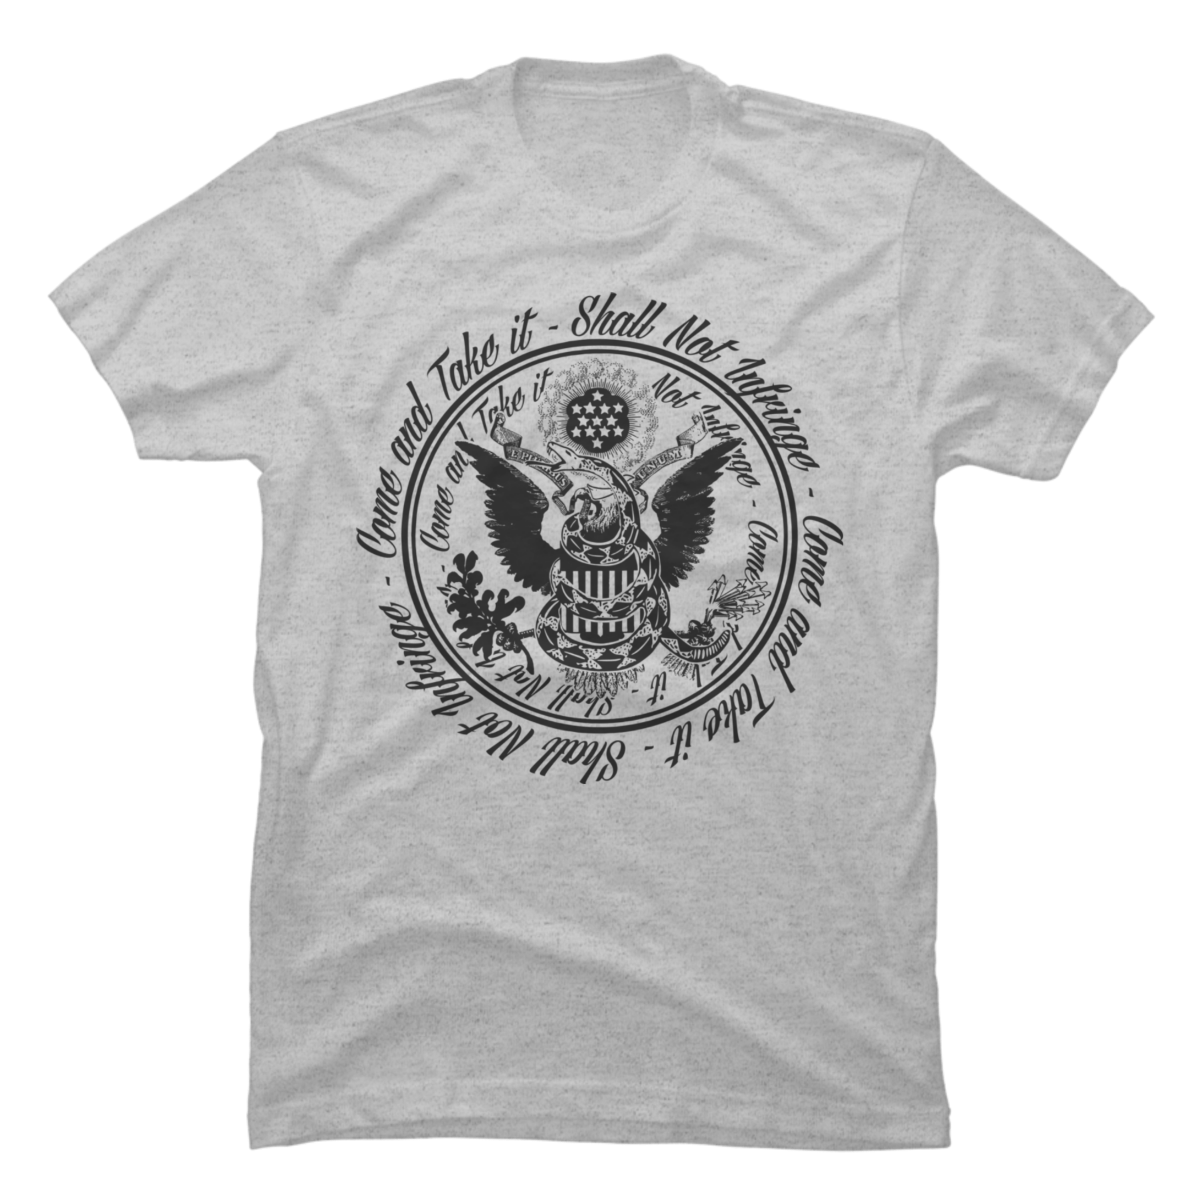 shall not be infringed shirt